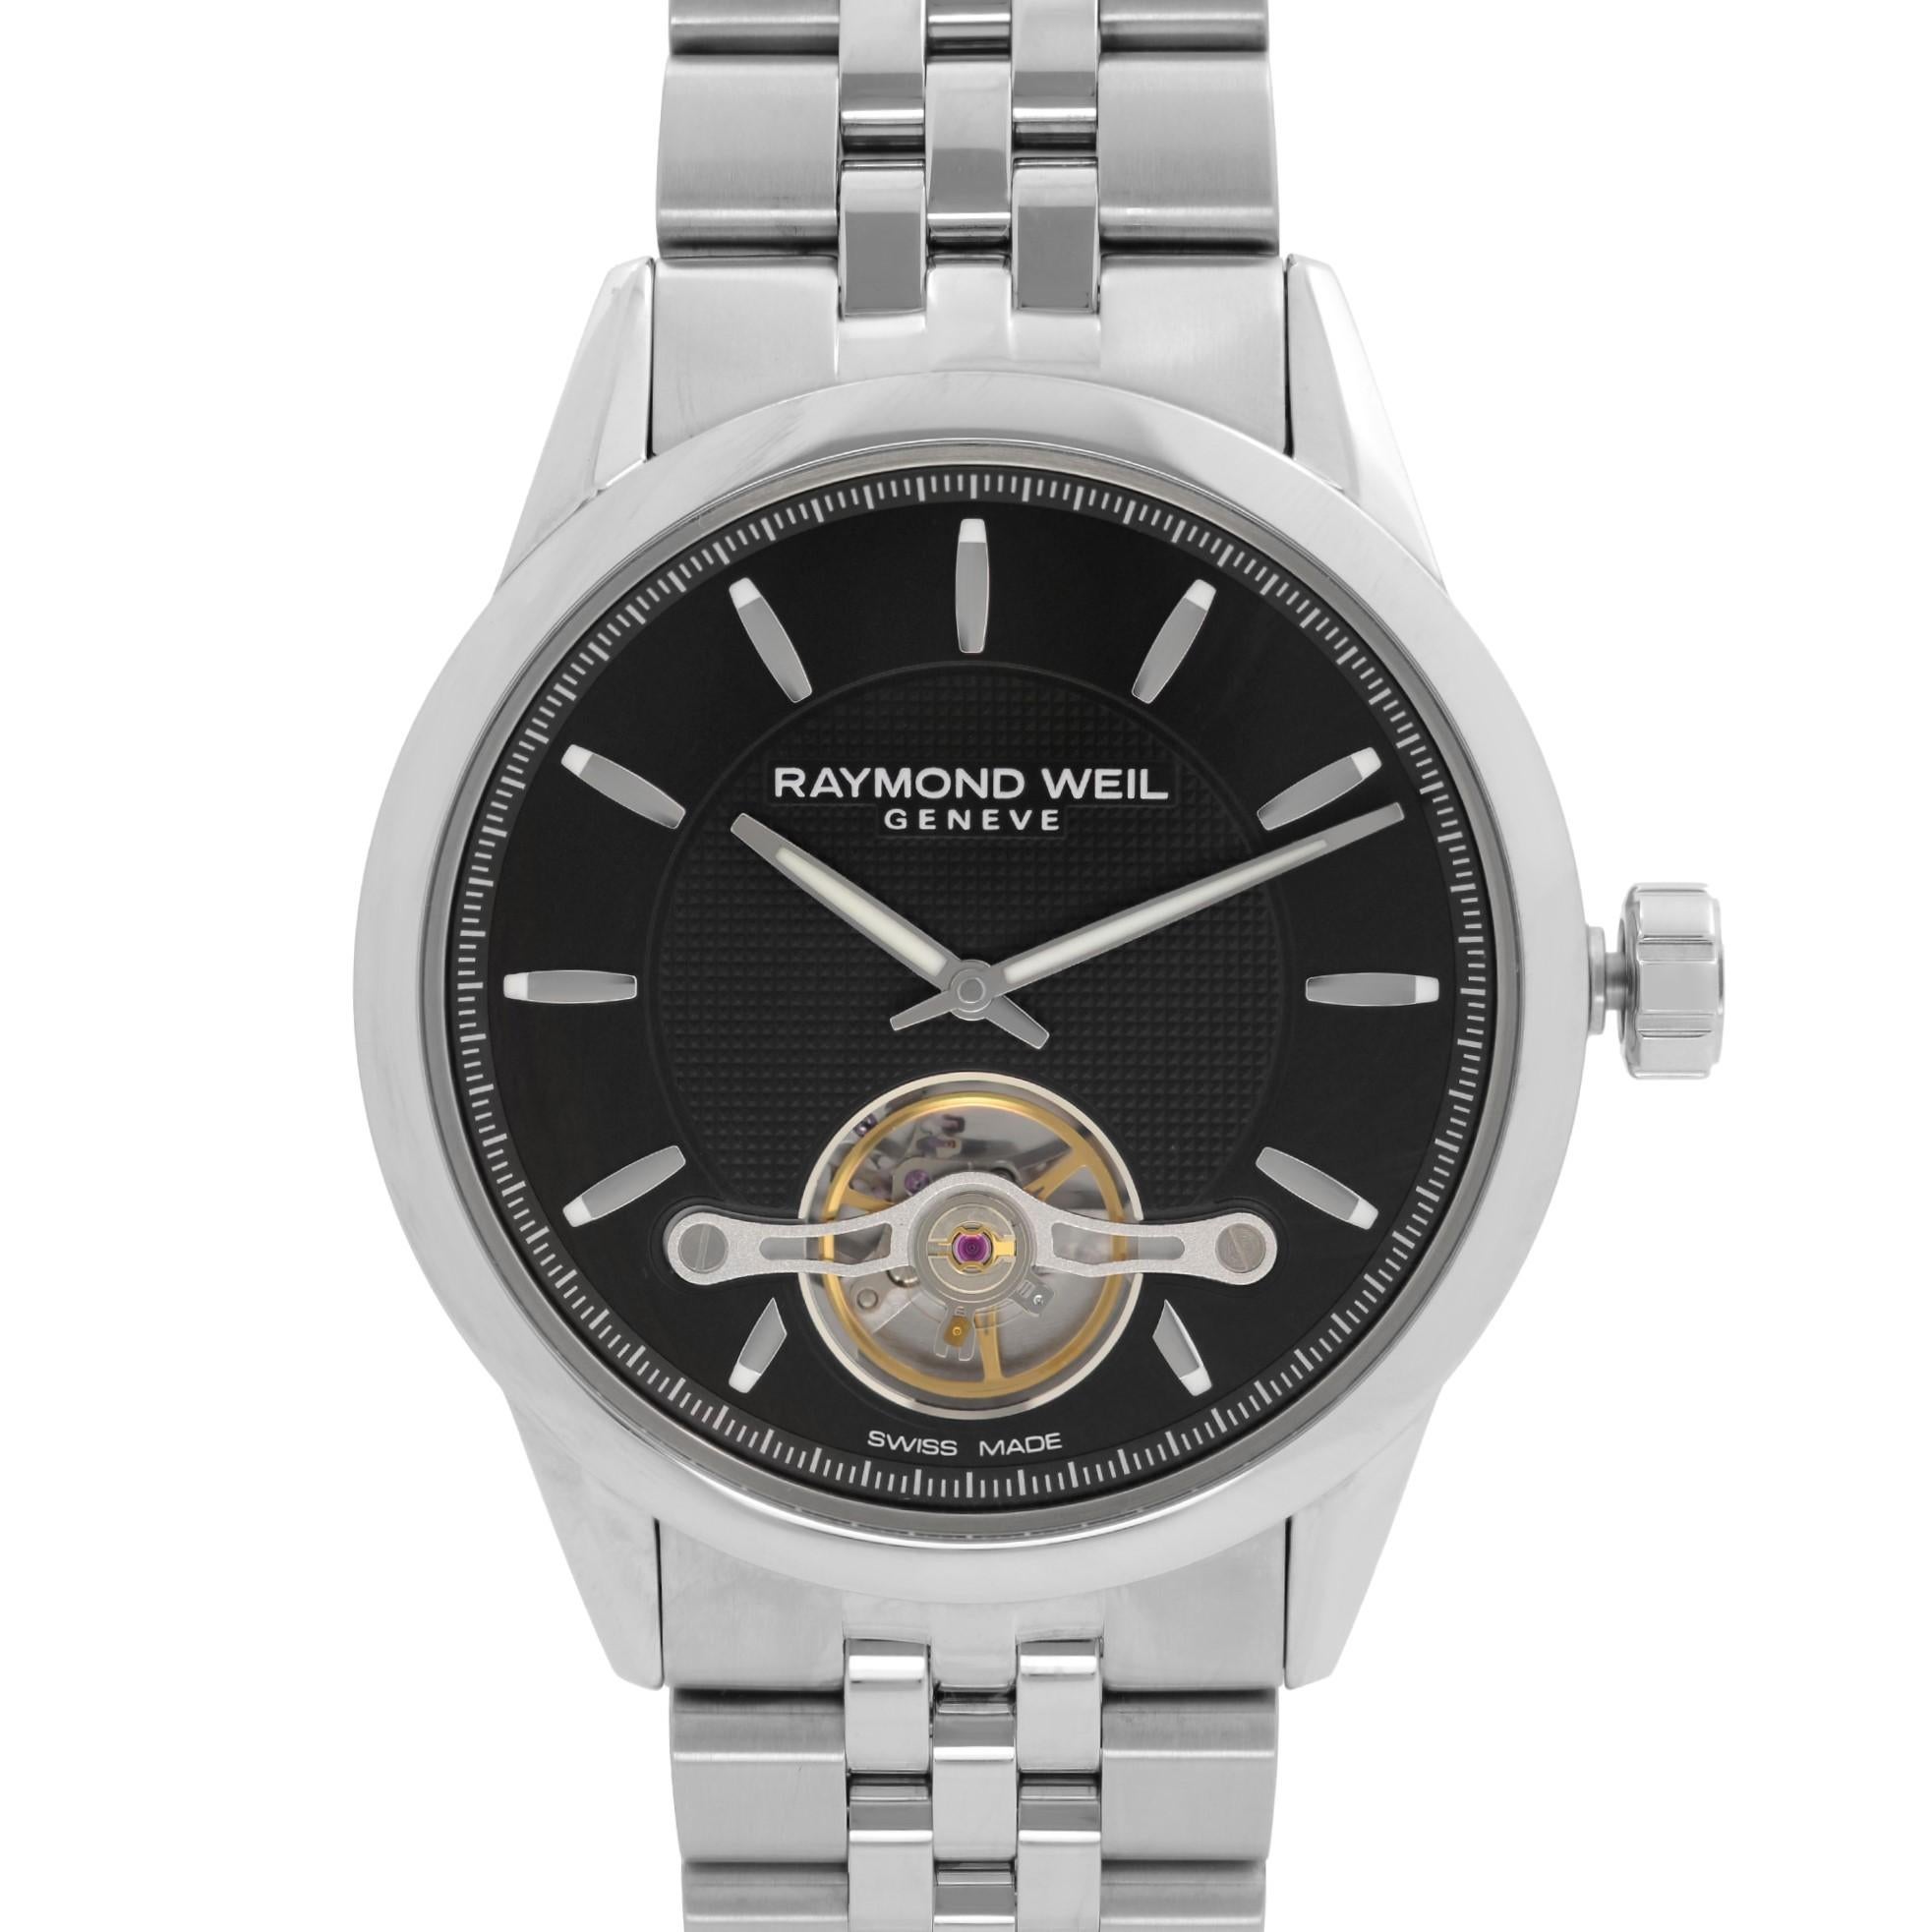 Never Worn Raymond Weil Freelancer 42mm Steel Black Dial Automatic Men's Watch 2780-ST-20001. This Beautiful Timepiece Features: Stainless Steel Case and Bracelet, Fixed Stainless Steel Bezel, Black Dial (with an Open Balance Wheel Window) with